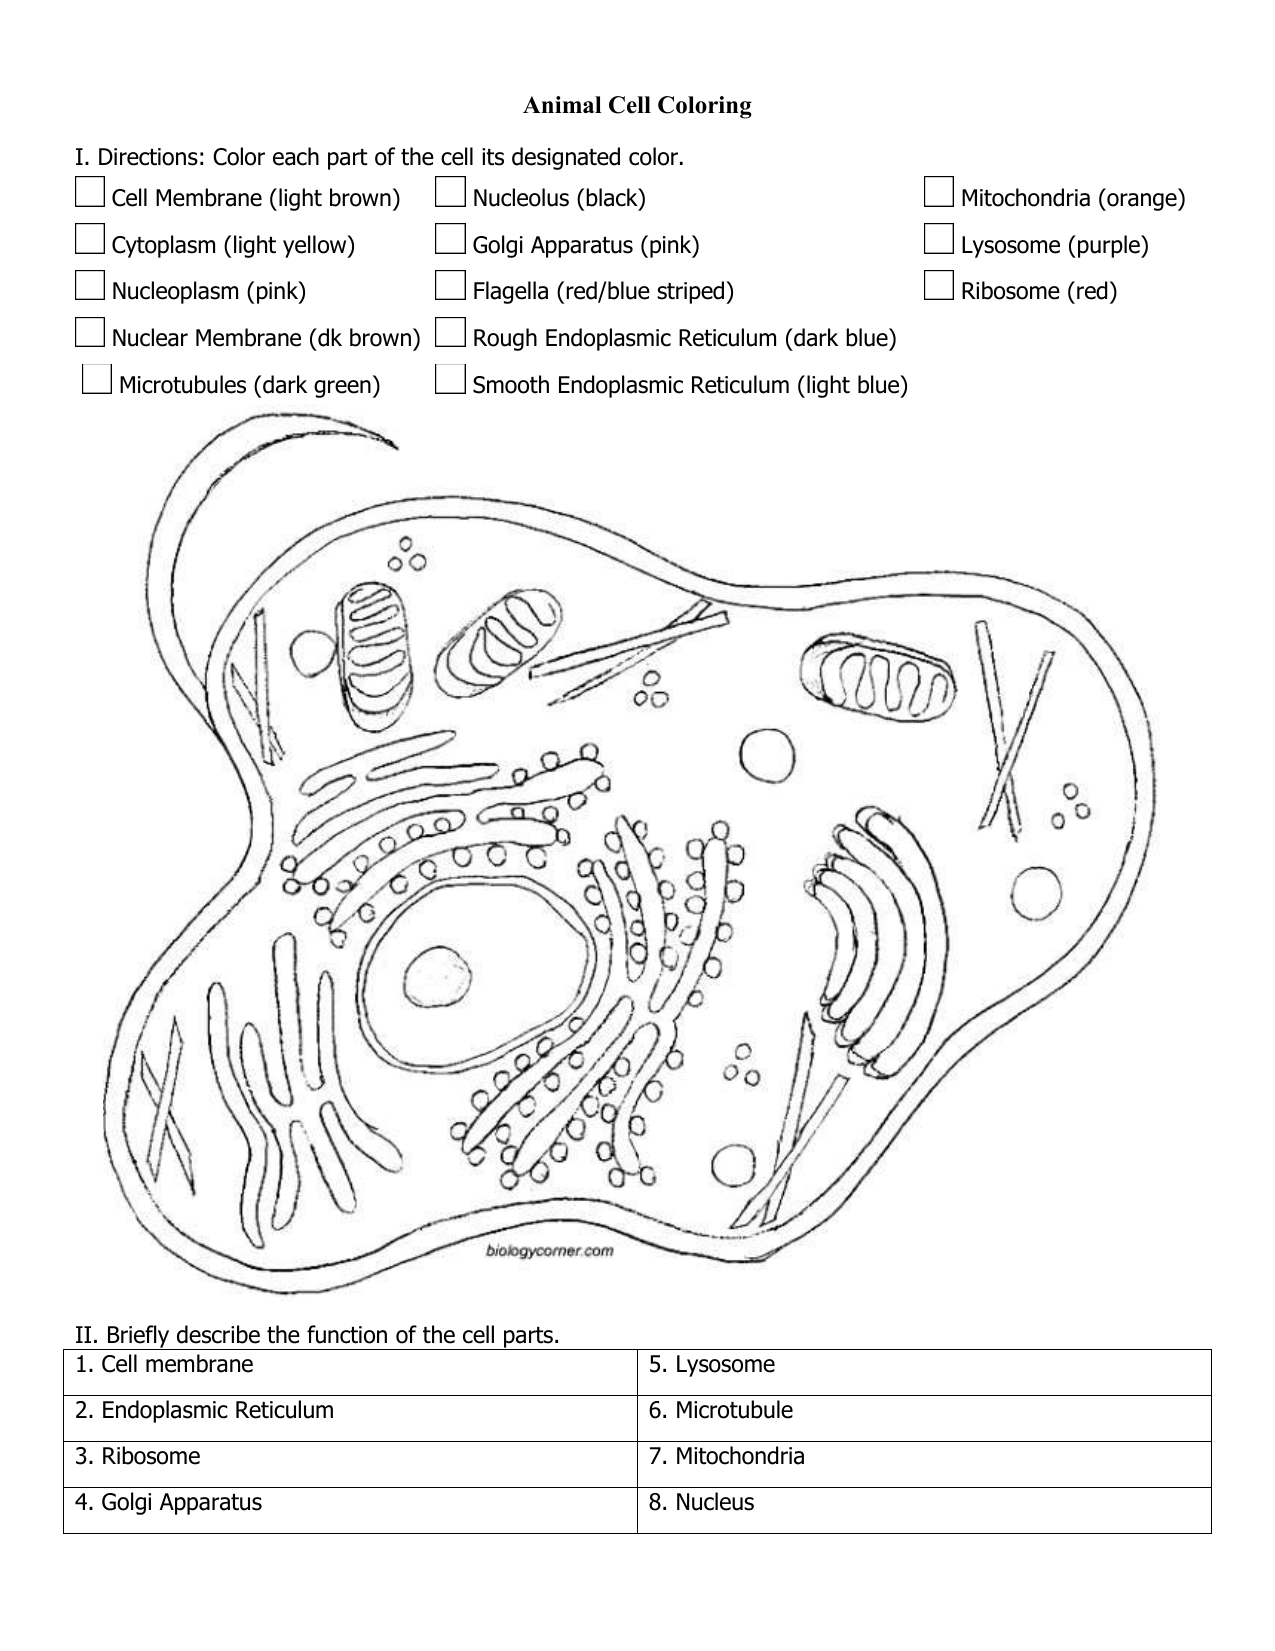 ASE SC 1 Animal & Plant Cell Coloring